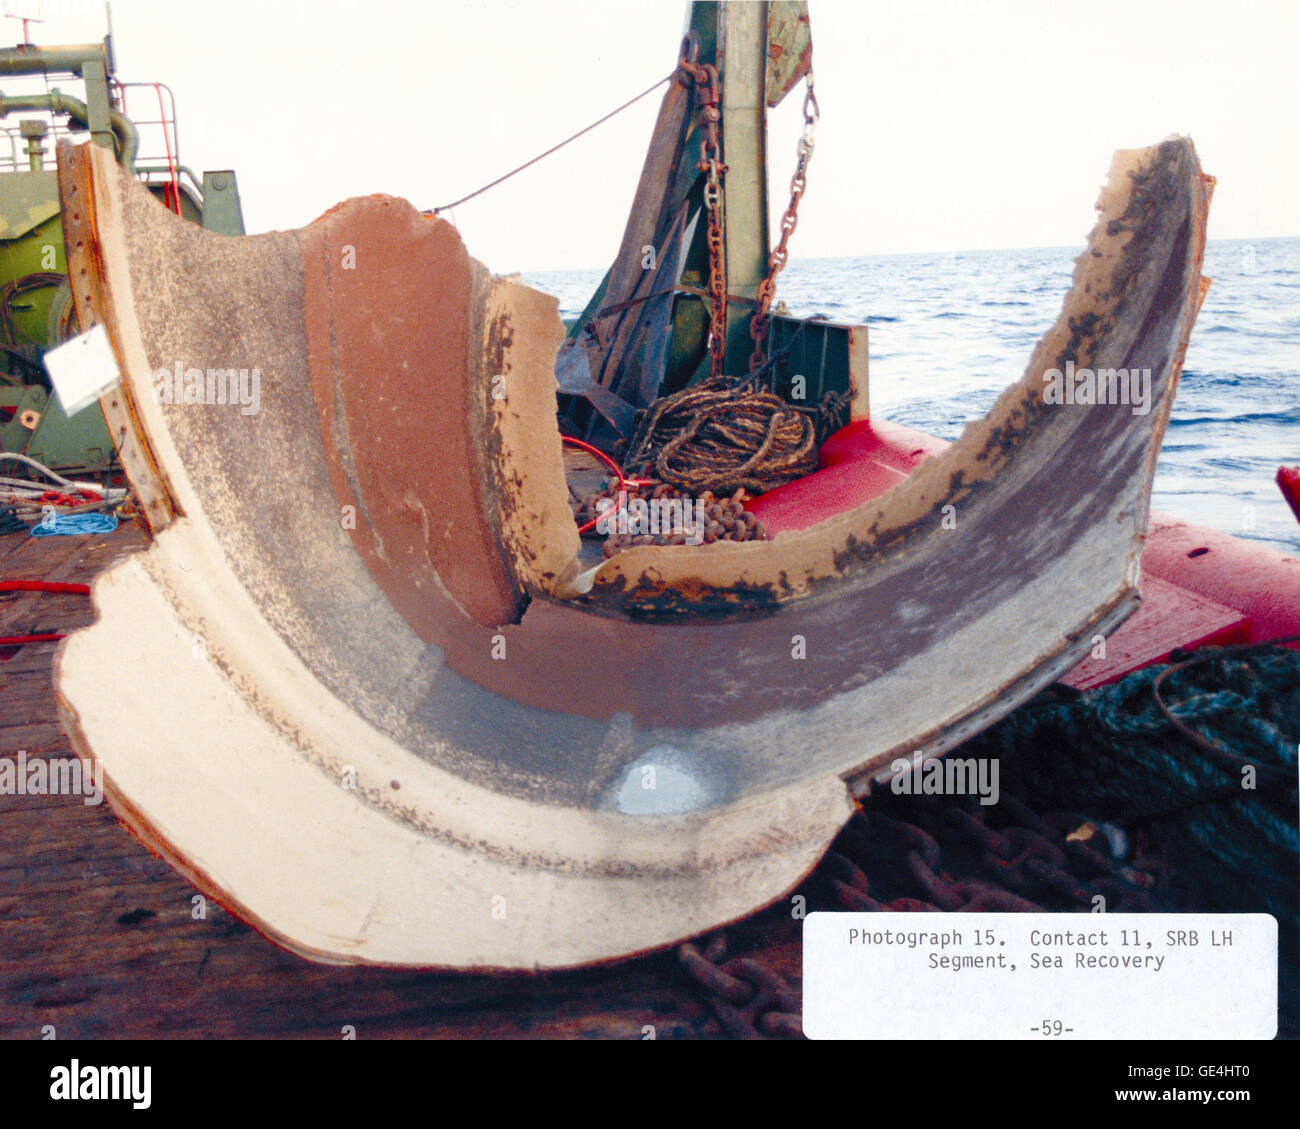 (March 7, 1986) On January 28, 1986, the Space Shuttle Challenger and her seven-member crew were lost when a ruptured O-ring in the right Solid Rocket Booster caused an explosion soon after launch. Search and recovery teams lifted this fragment of the Shuttle's Solid Rocket Booster (SRB) from the ocean onto a waiting ship and then returned it to Kennedy Space Center for the investigation into causes of the accident. A chemical profile on the propellant traces remaining on the metal combined with its ocean location in comparison to radar trajectory charts led the teams to conclude that this pie Stock Photo